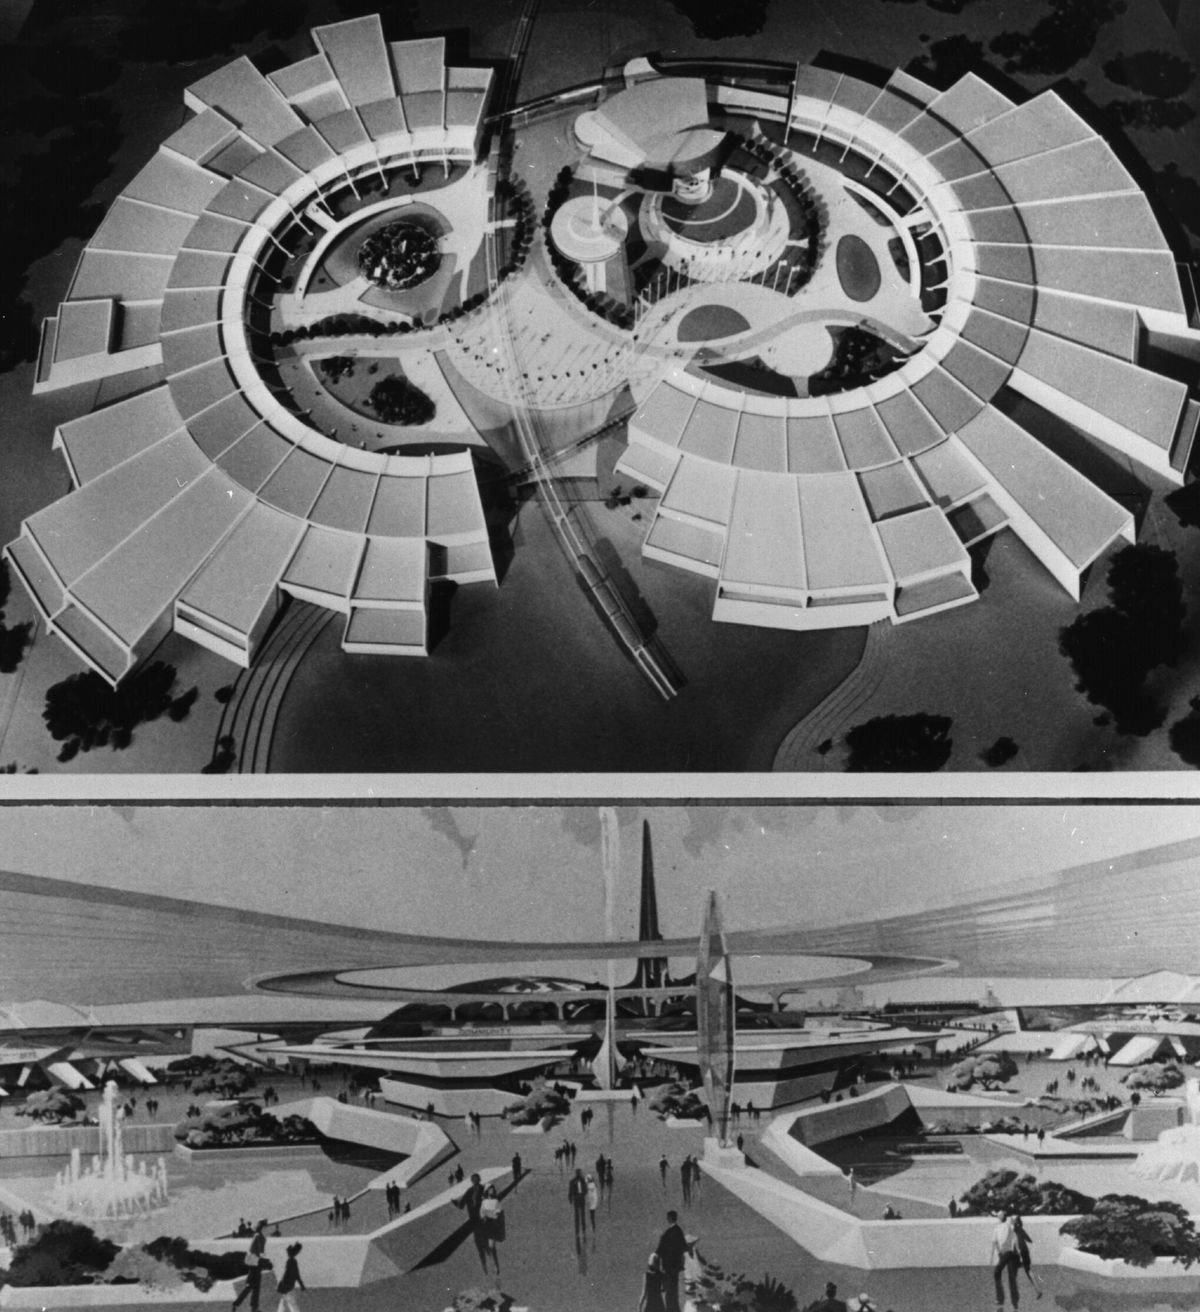 A 1961 archival photo of concept design images for EPCOT Center, with a flared, circular model of a building as seen from overhead, and concept art of an open, futuristic plaza populated by parkgoers